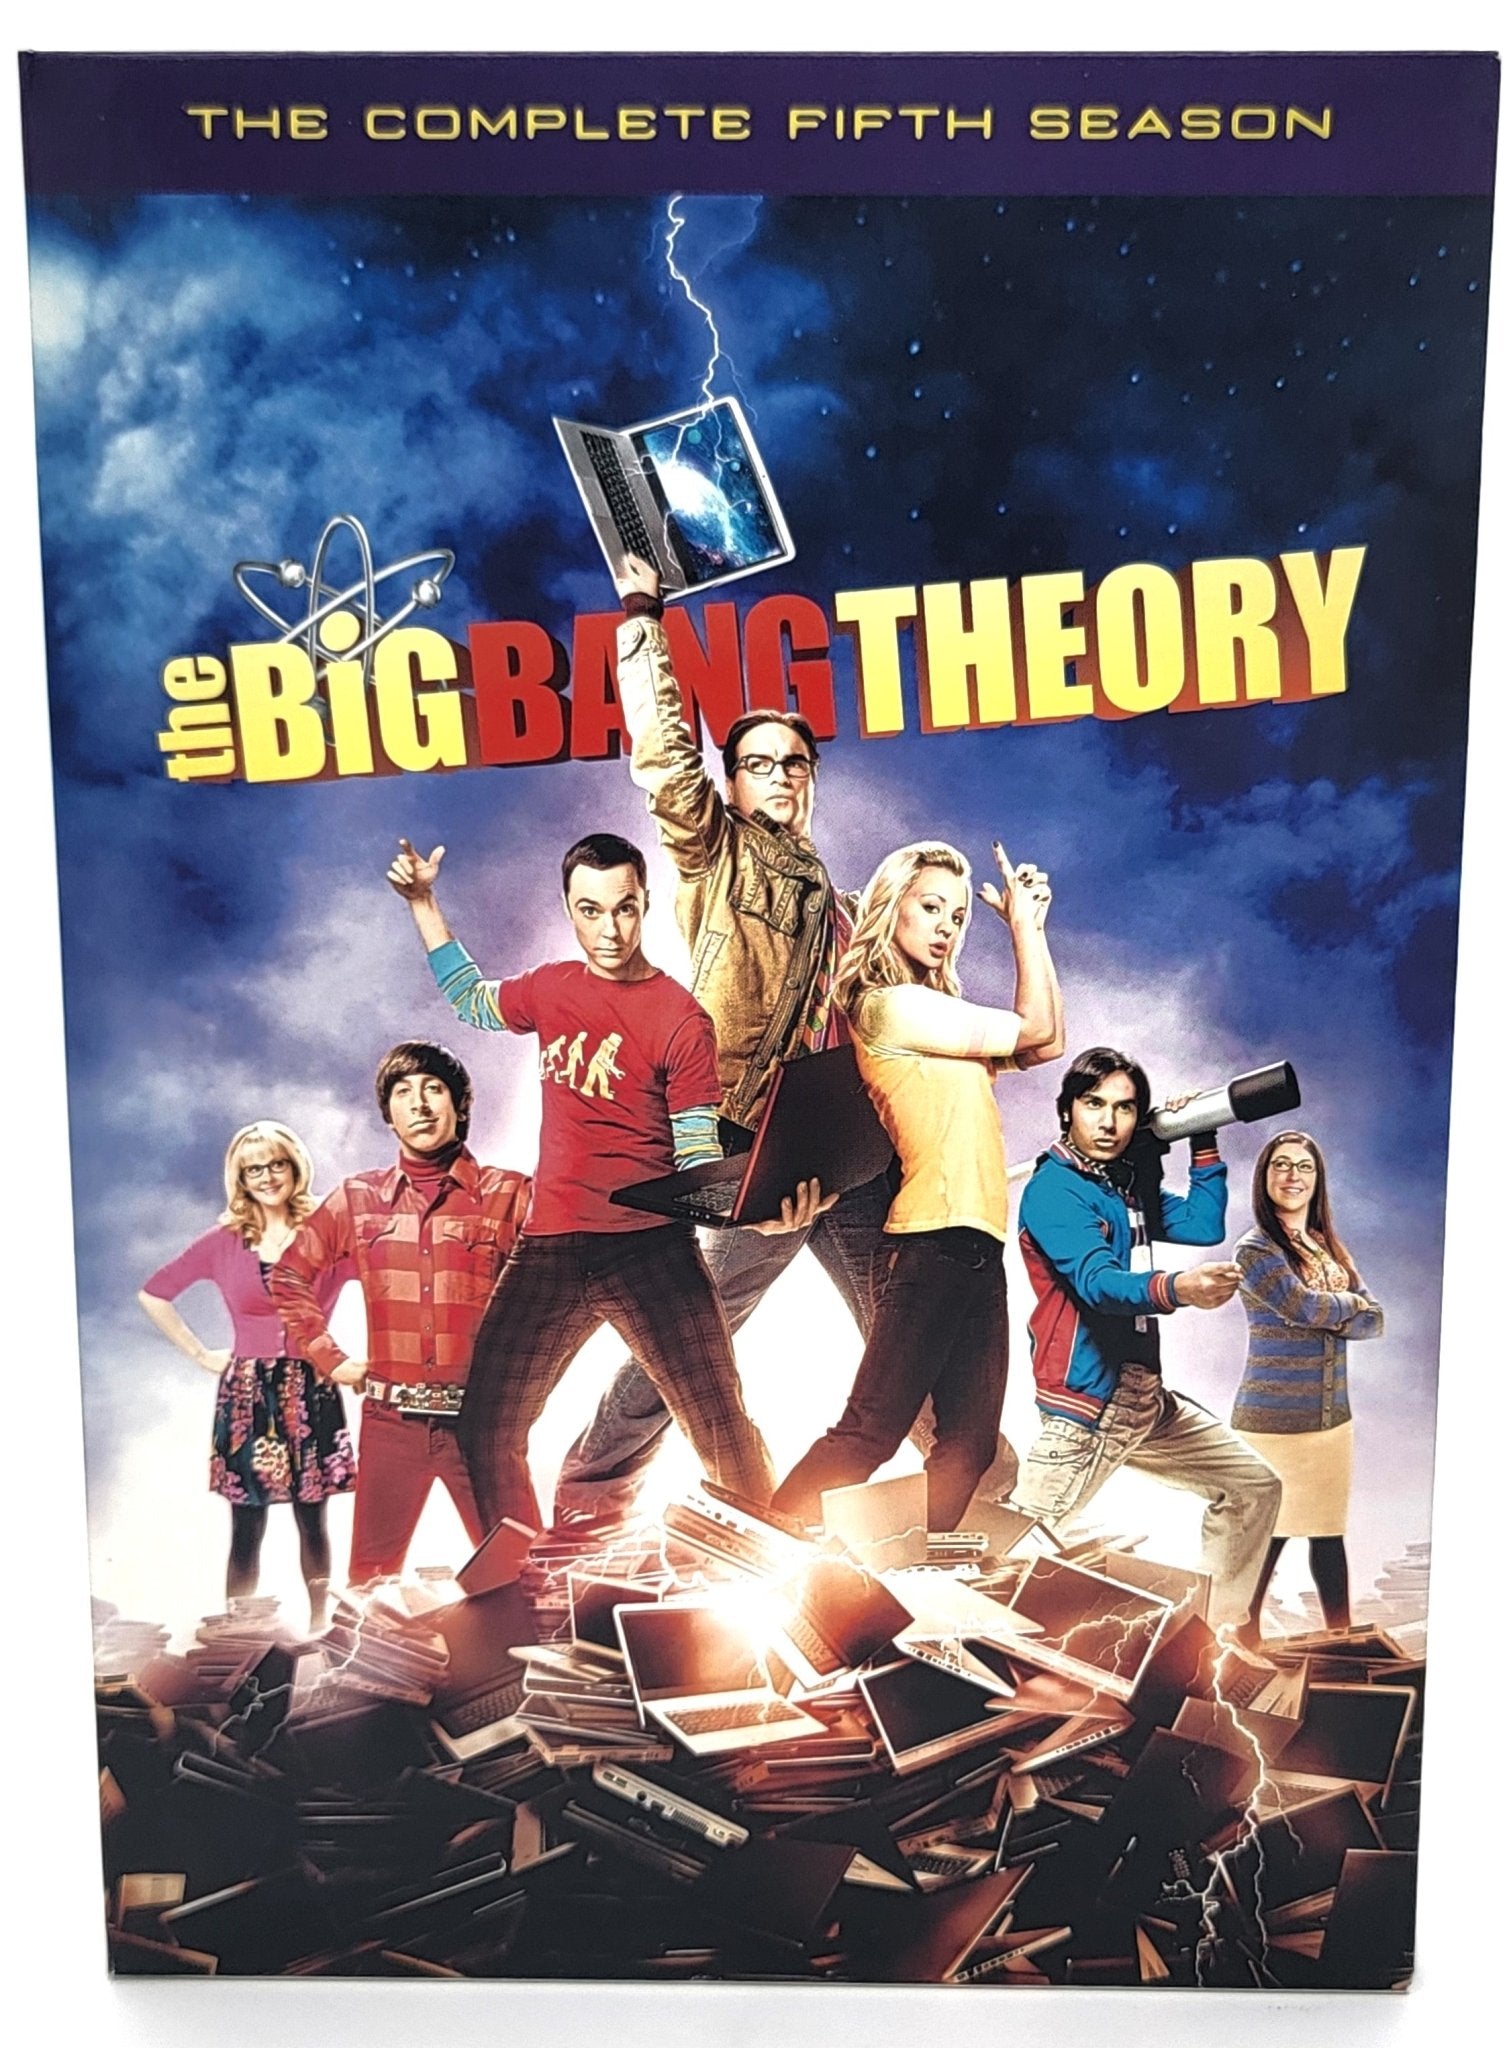 Studio Distribution Services - The Big Bang Theory Seasons 1-12 Complete Set | DVD - Complete Series - DVD - Steady Bunny Shop